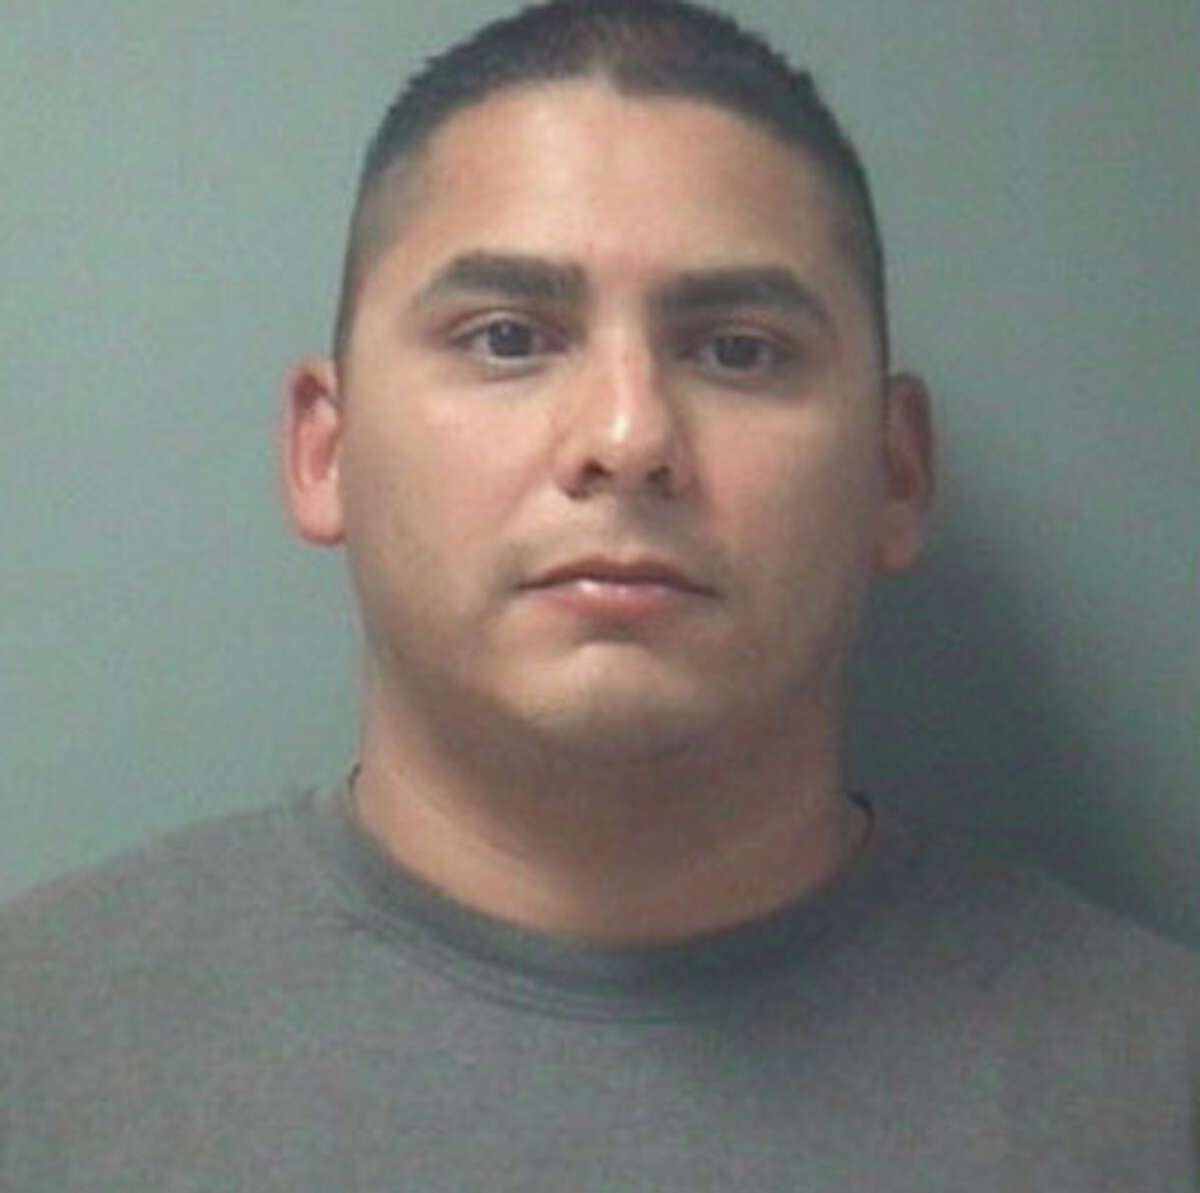 Ruben Orneals, a former Galveston County deputy is accused of asking a 14-year-old girl for sex and sending her sexually explicit text messages.